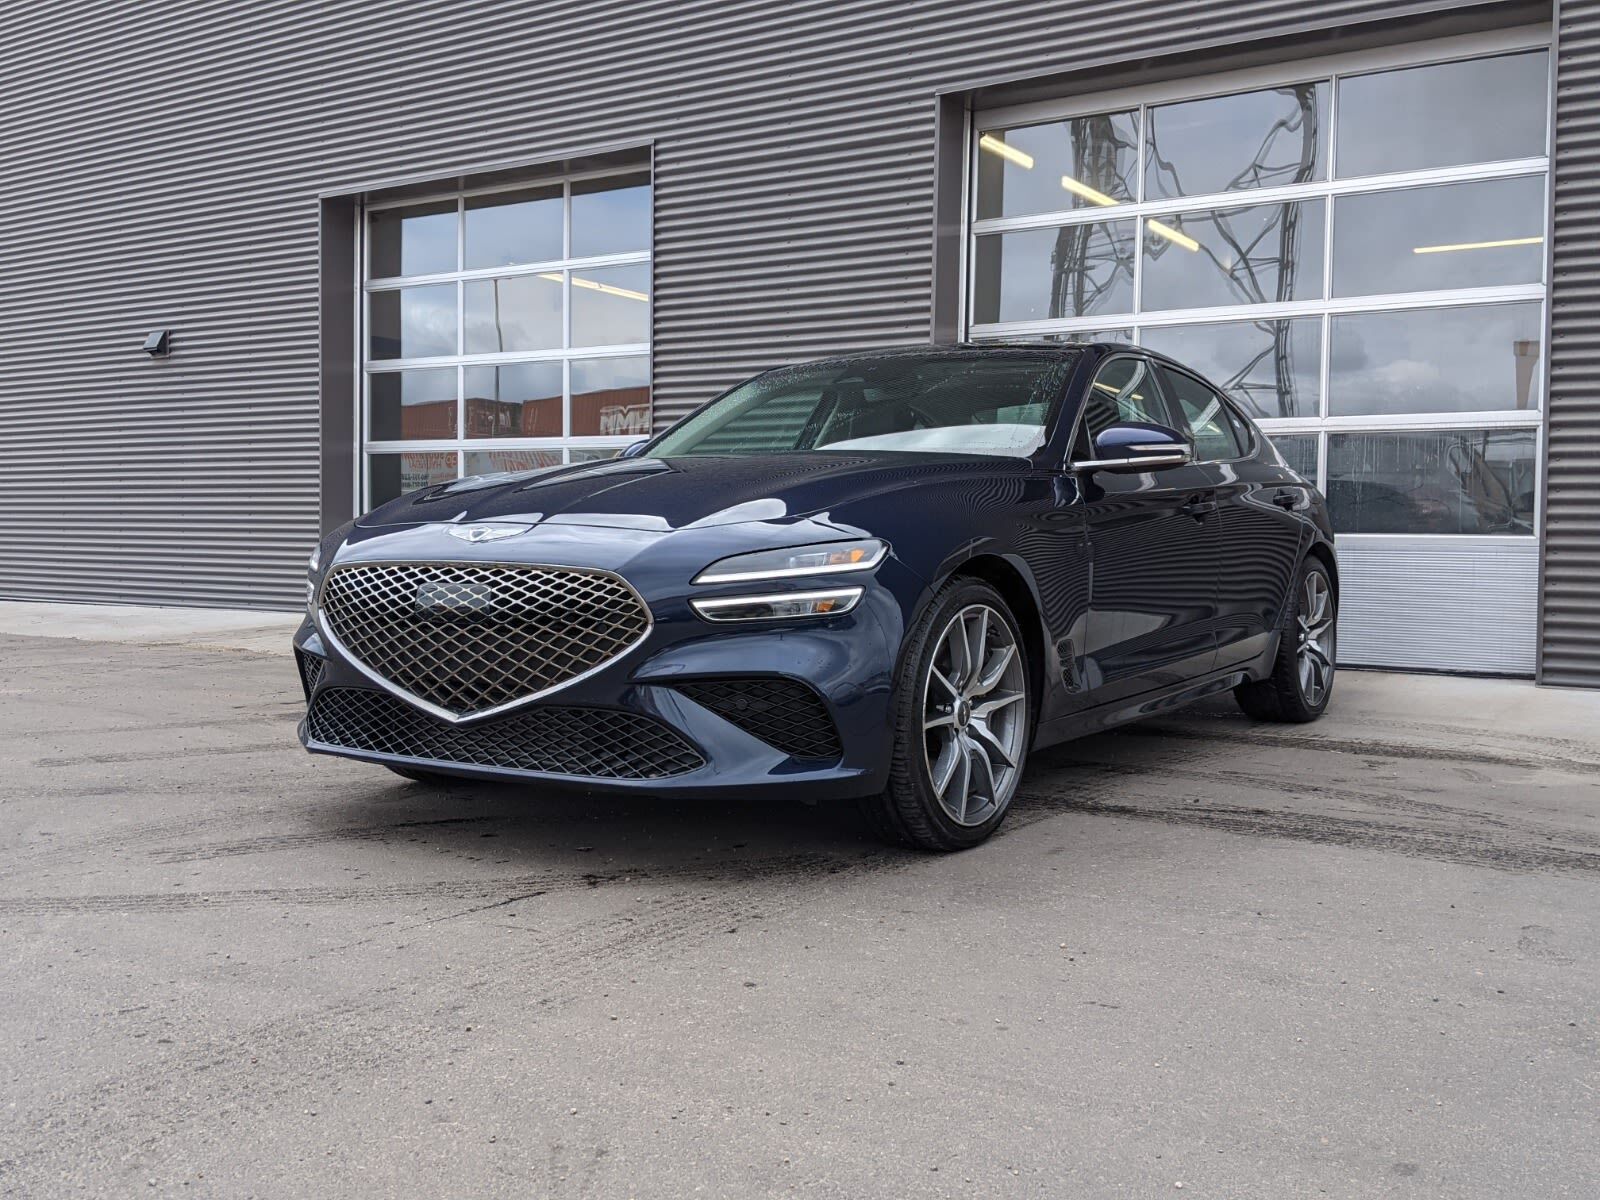 2022 Genesis G70 3.3T Advanced - No Accidents! Low Kms!